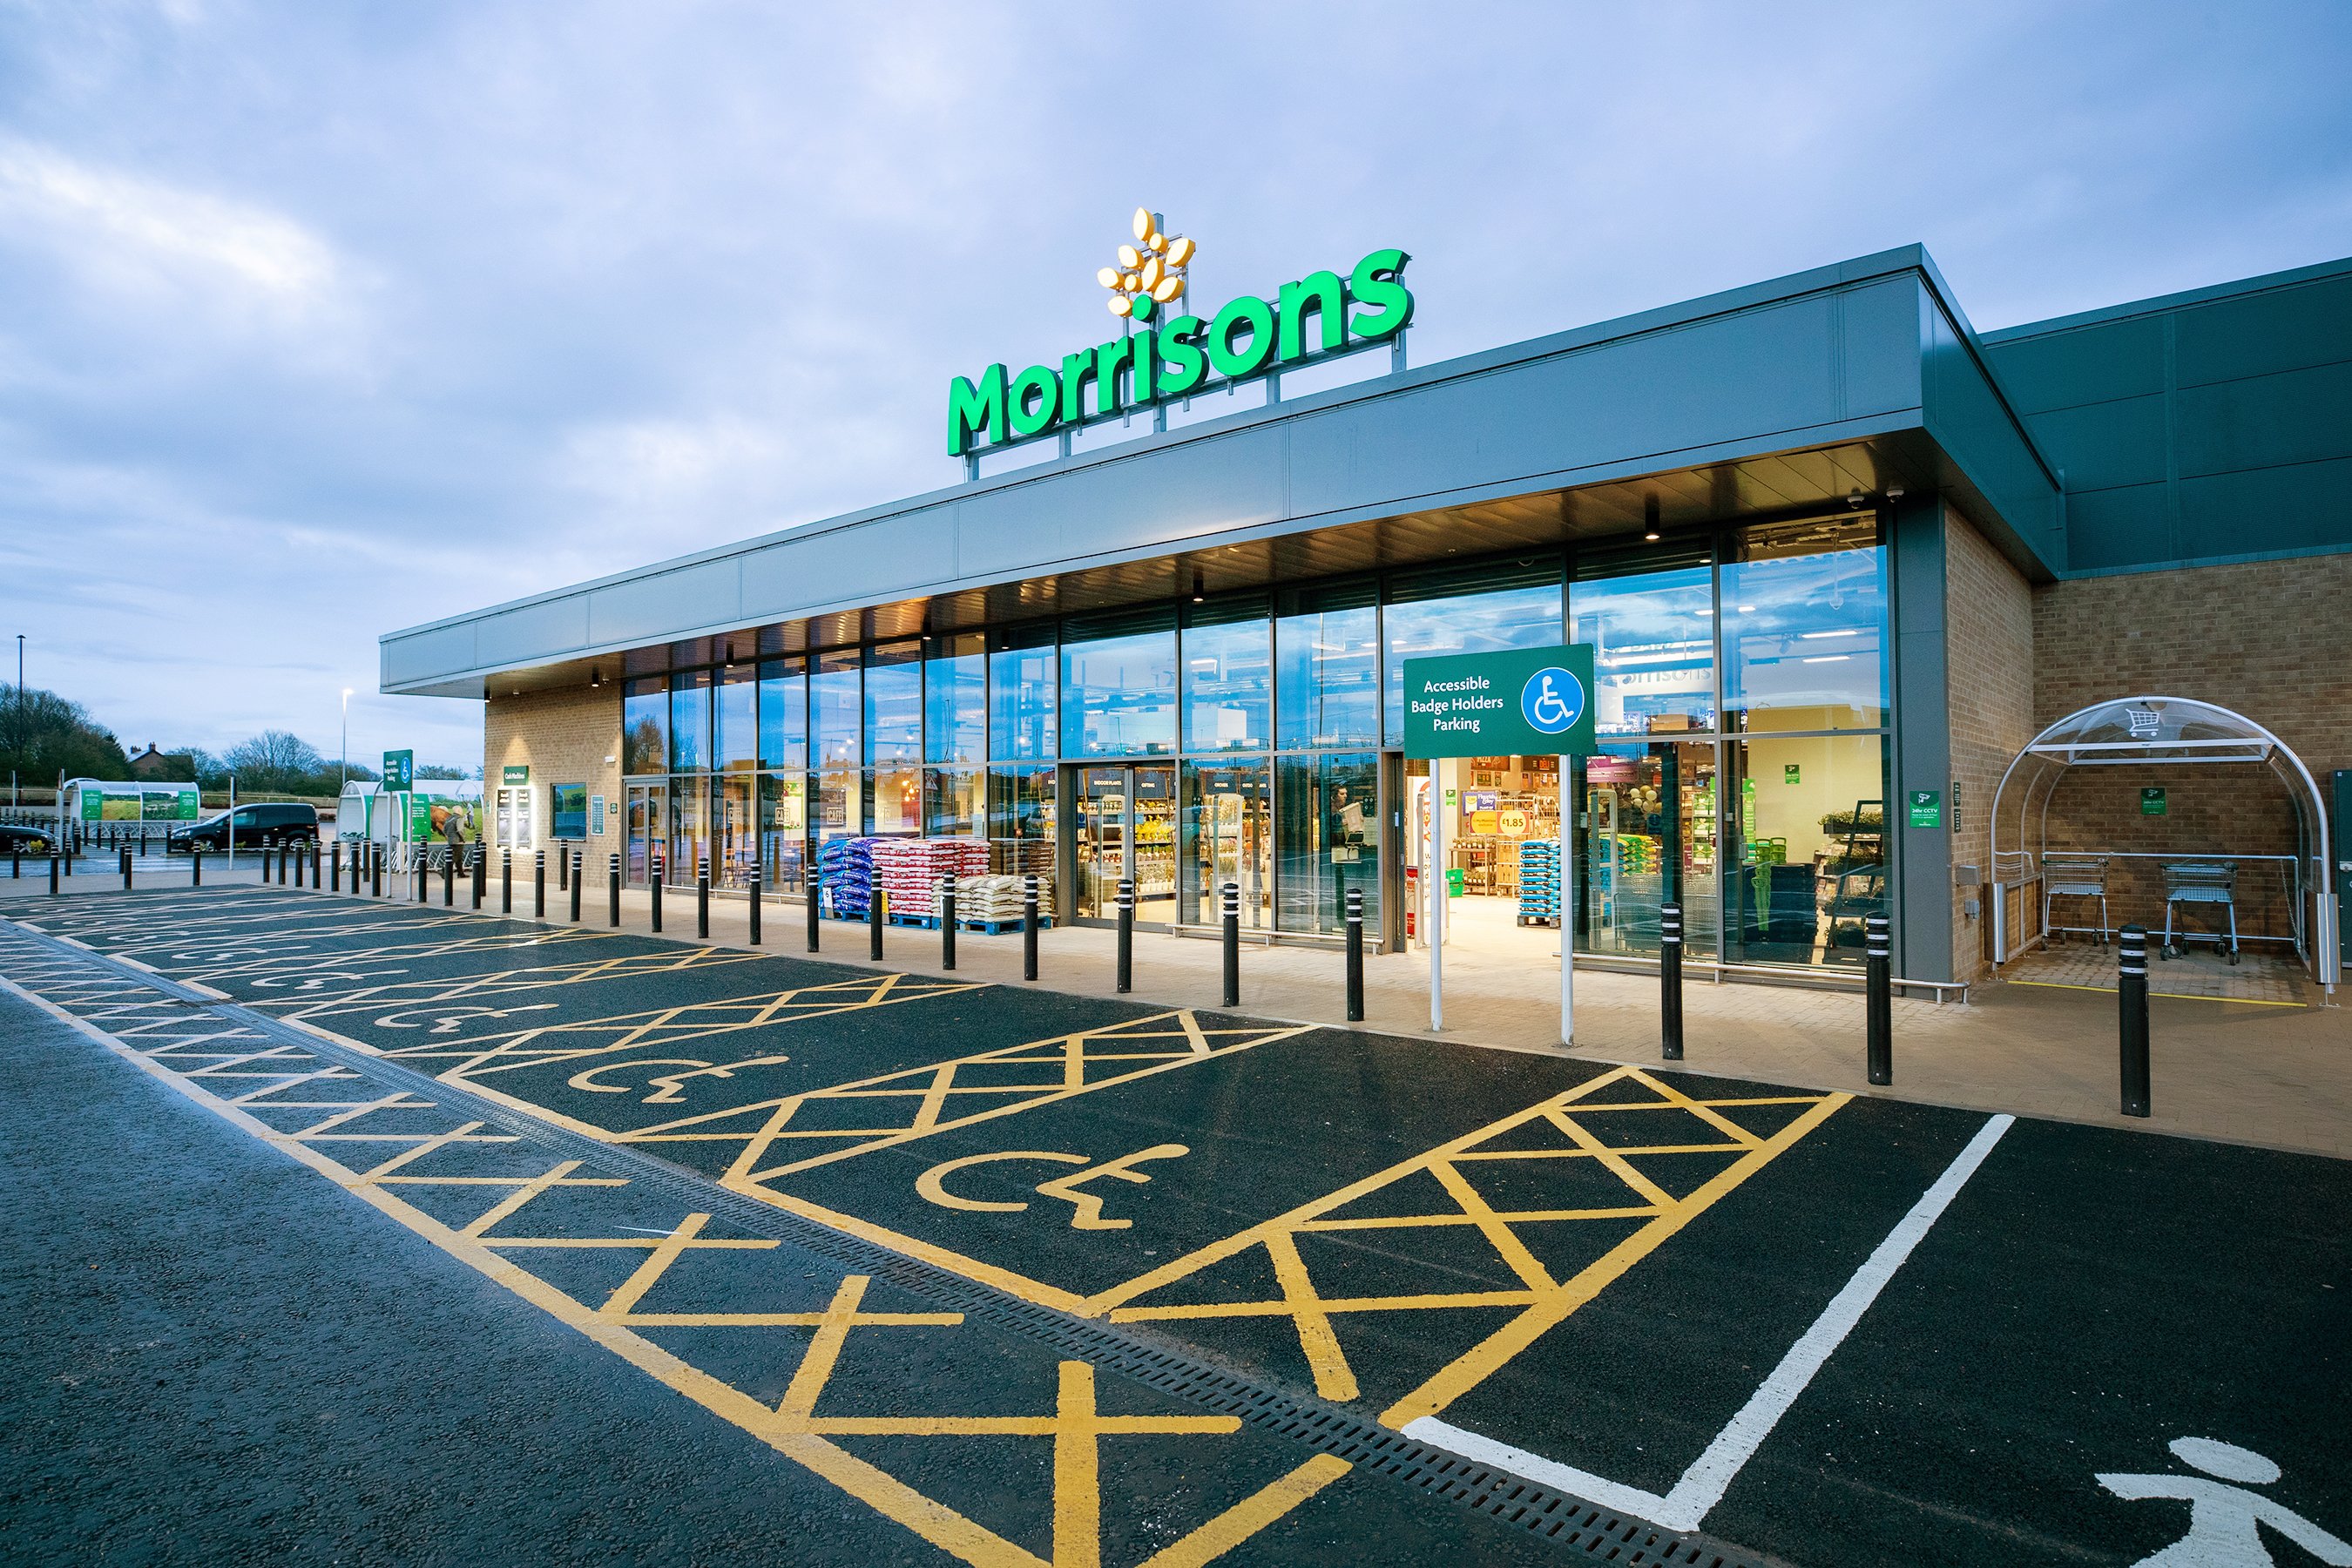 Morrisons trading update for Q4 and full year 2022/23